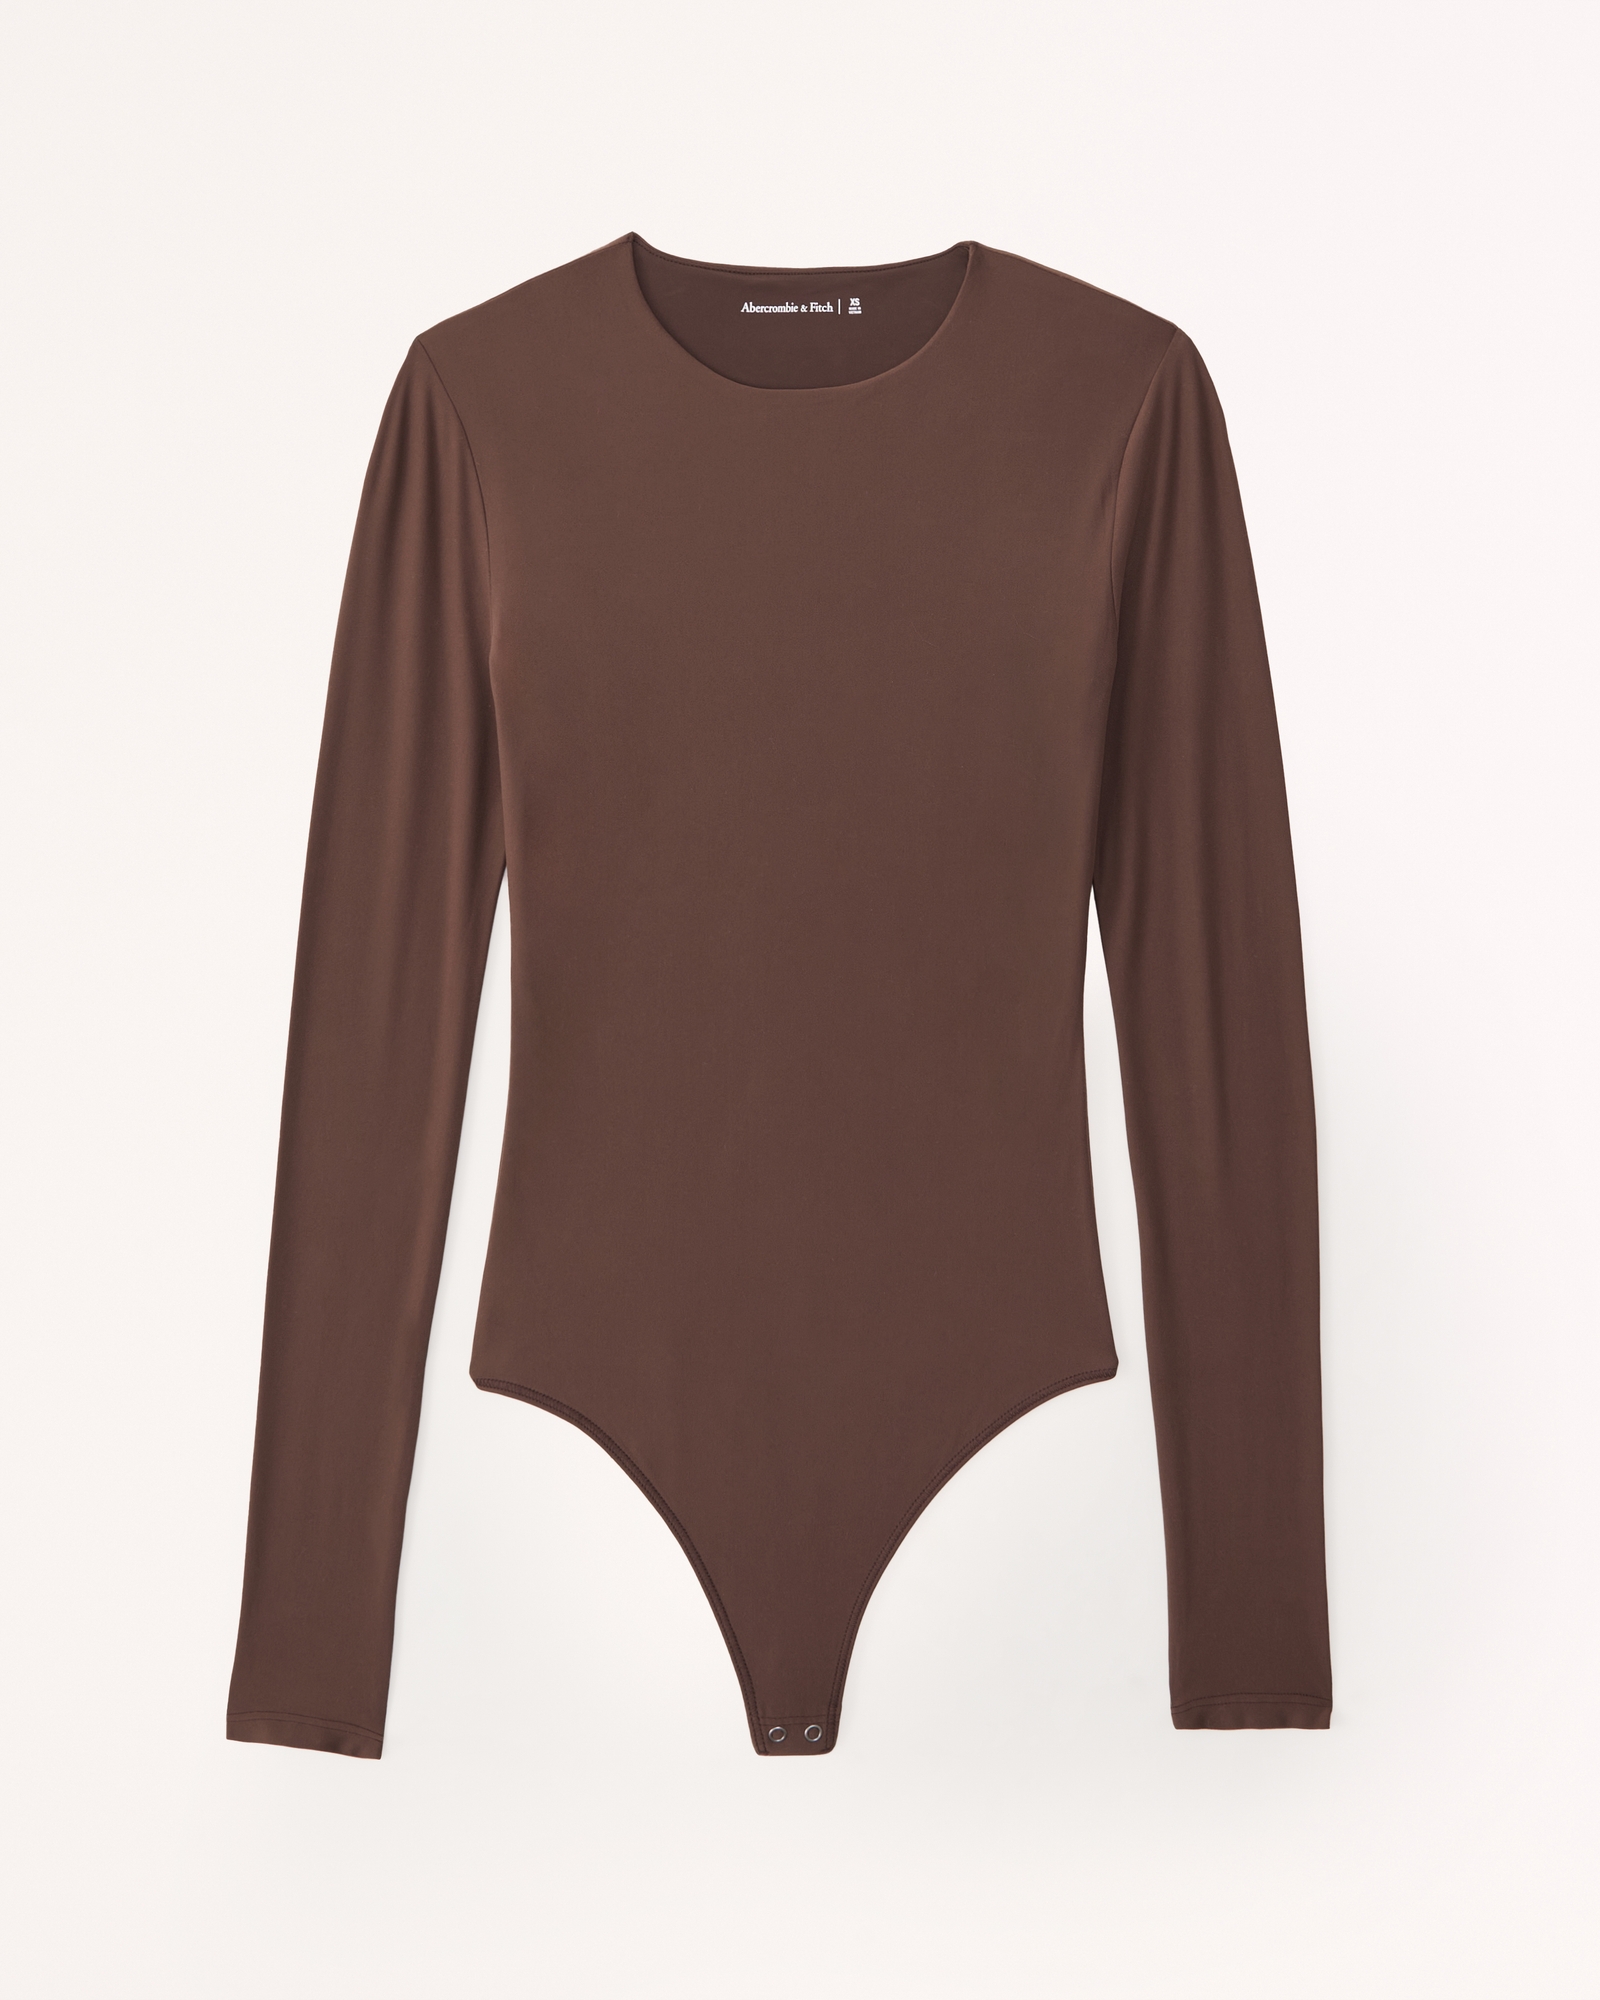 Abercrombie & Fitch Money Bodysuits for Women